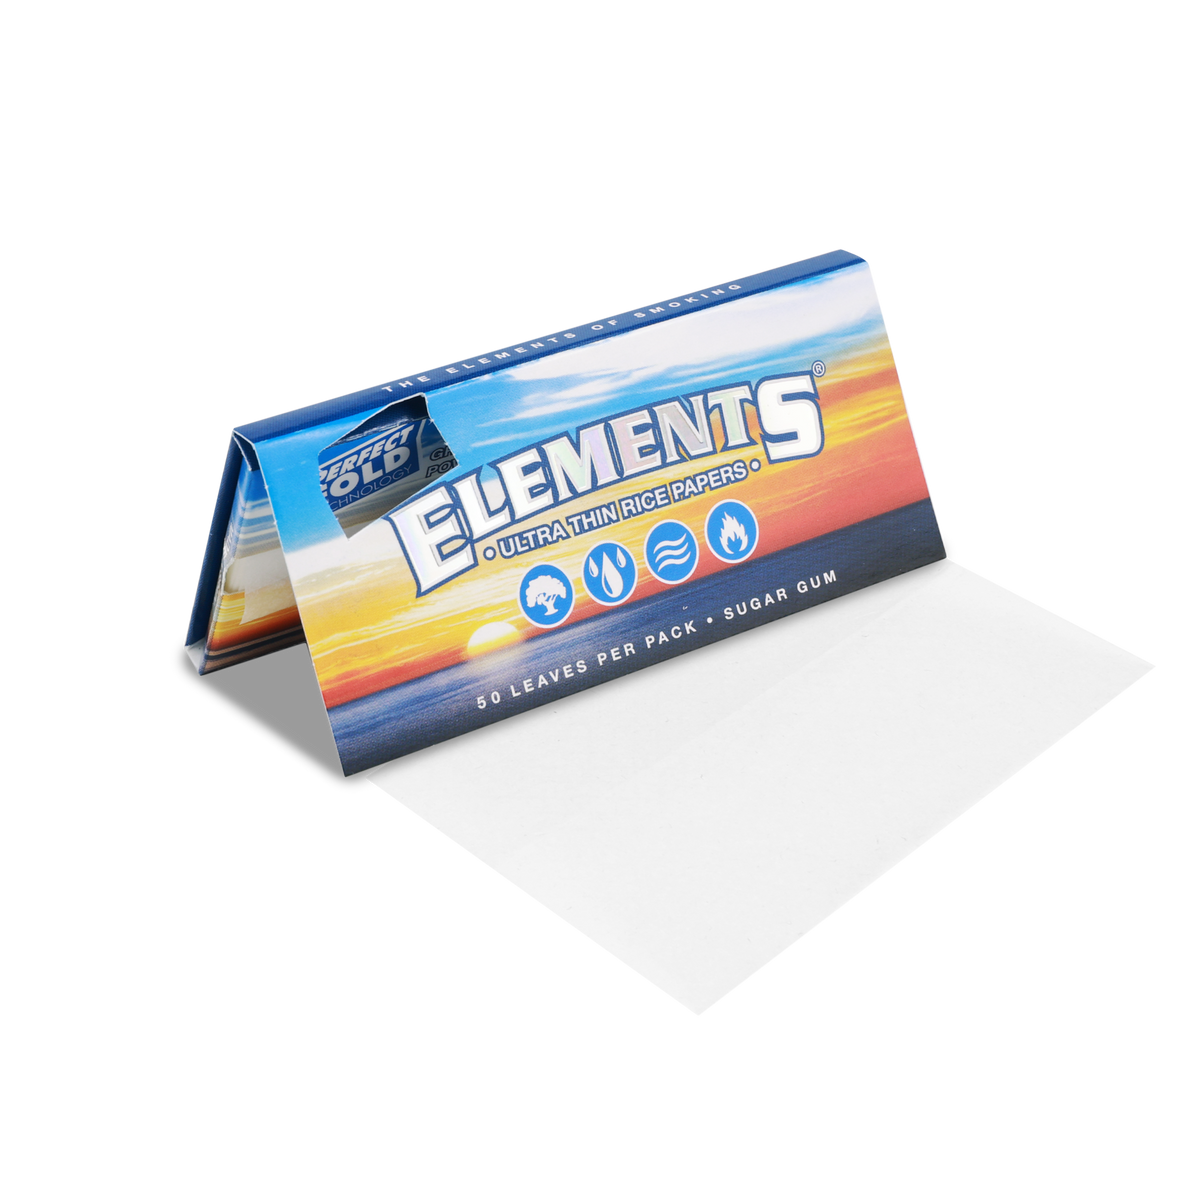 Elements Rice Paper Perfect Fold 1¼ Rolling Papers Rolling Papers ELE10060-1/25 esd-official